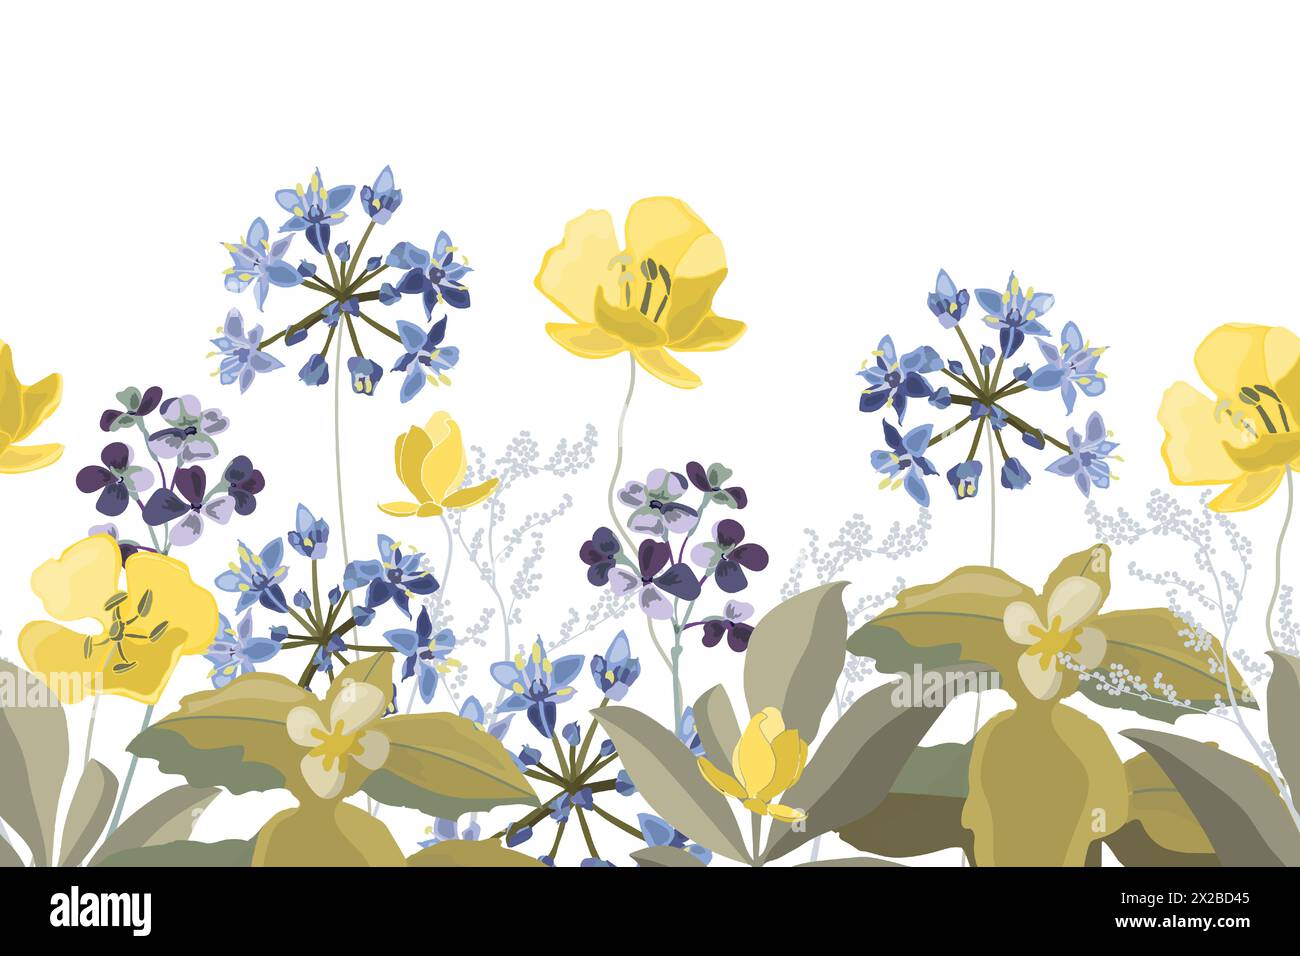 Vector floral seamless pattern, border with blue and yellow flowers. Stock Vector